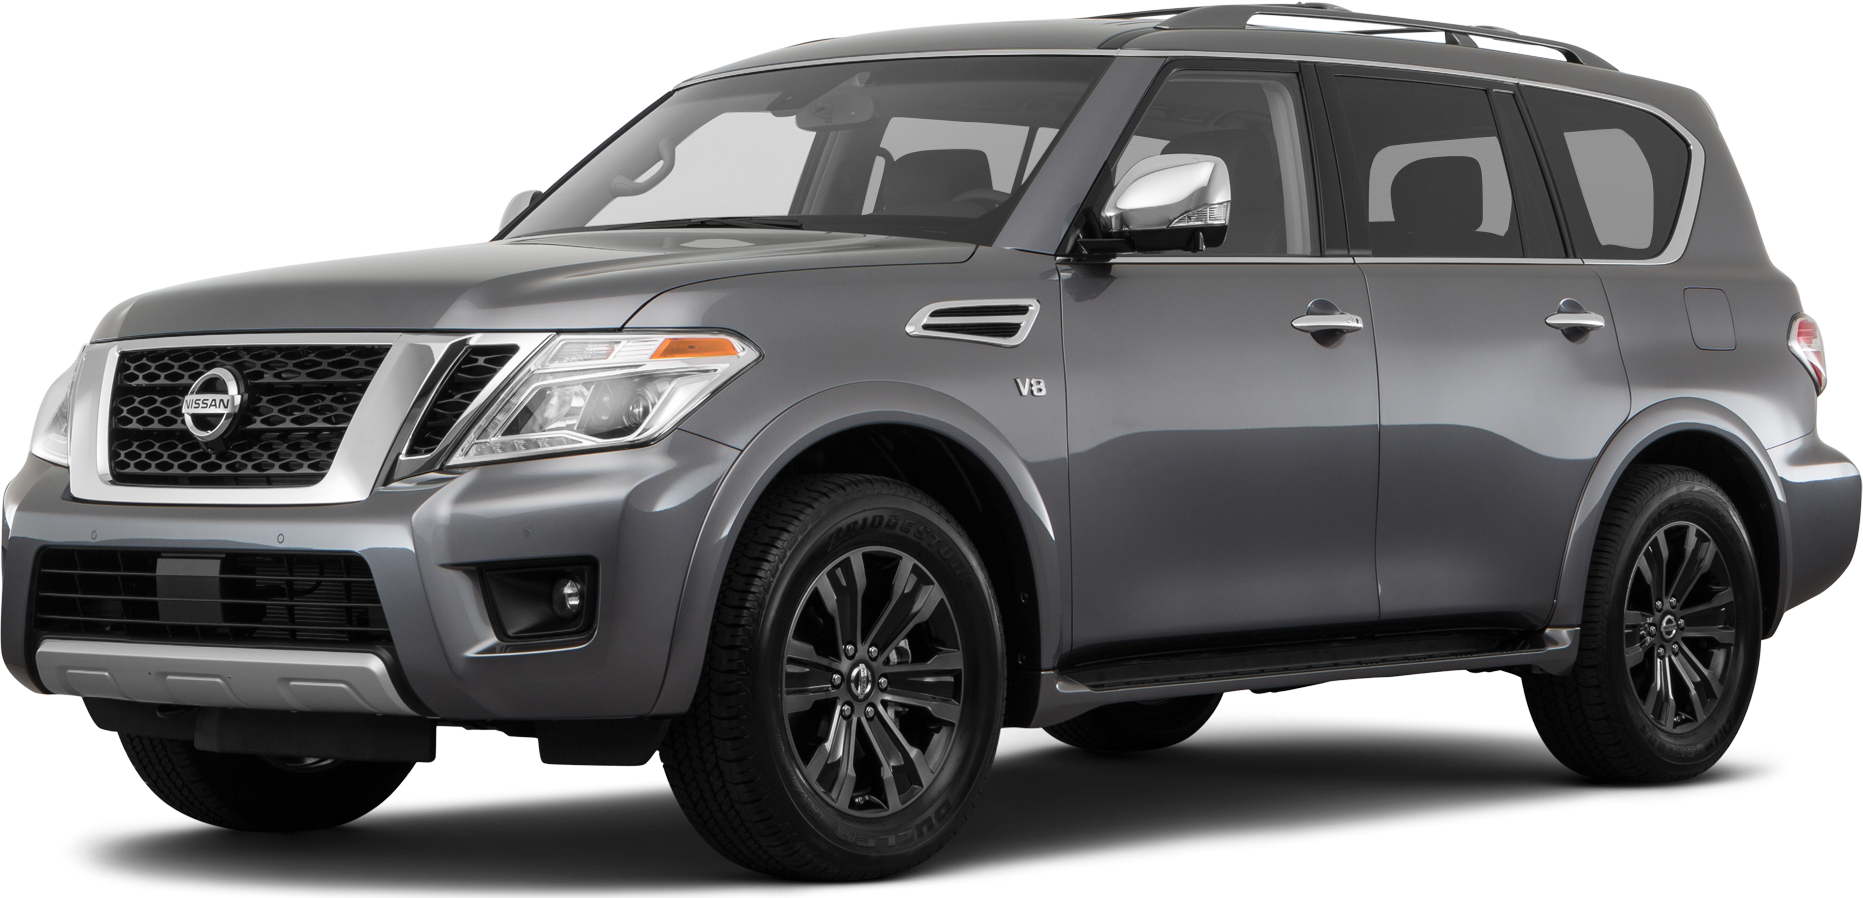 2017 Nissan Armada Specs and Features | Kelley Blue Book